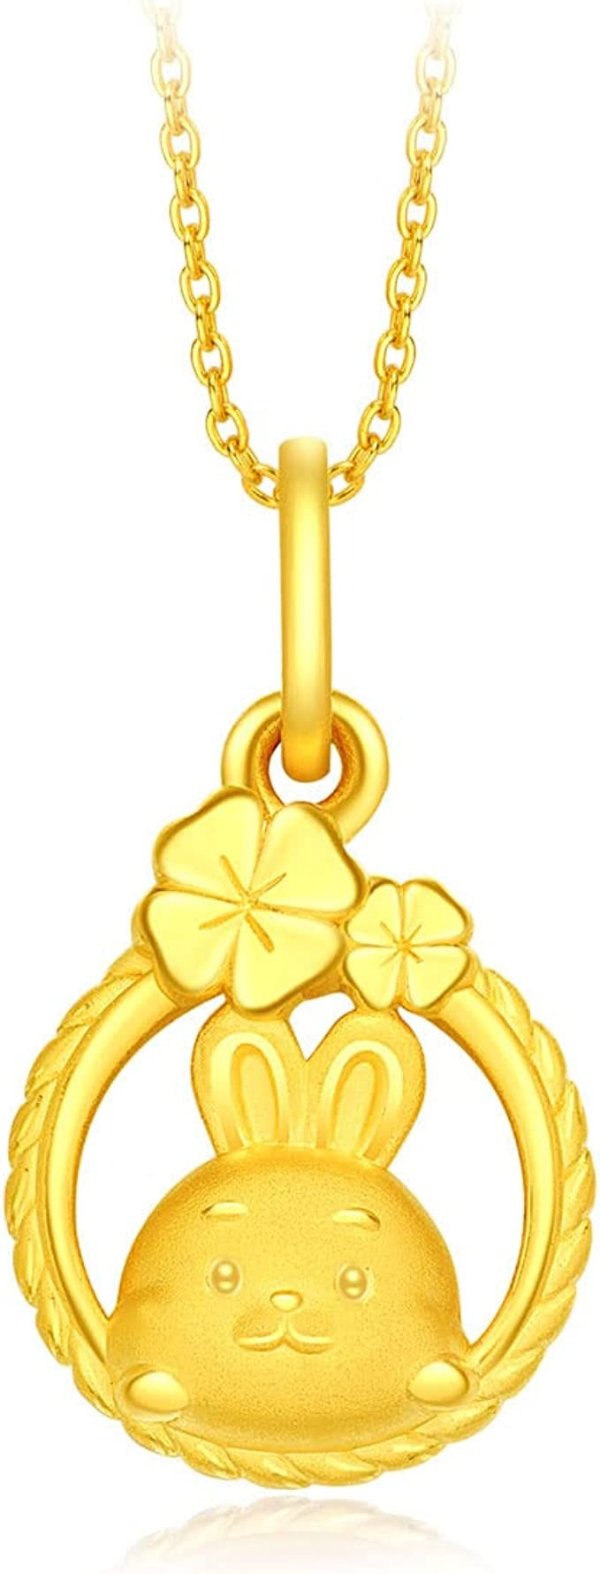 Chow Tai Fook 999 Pure 24K Gold Year of Rabbit Welcomes Spring Bunny Pendant